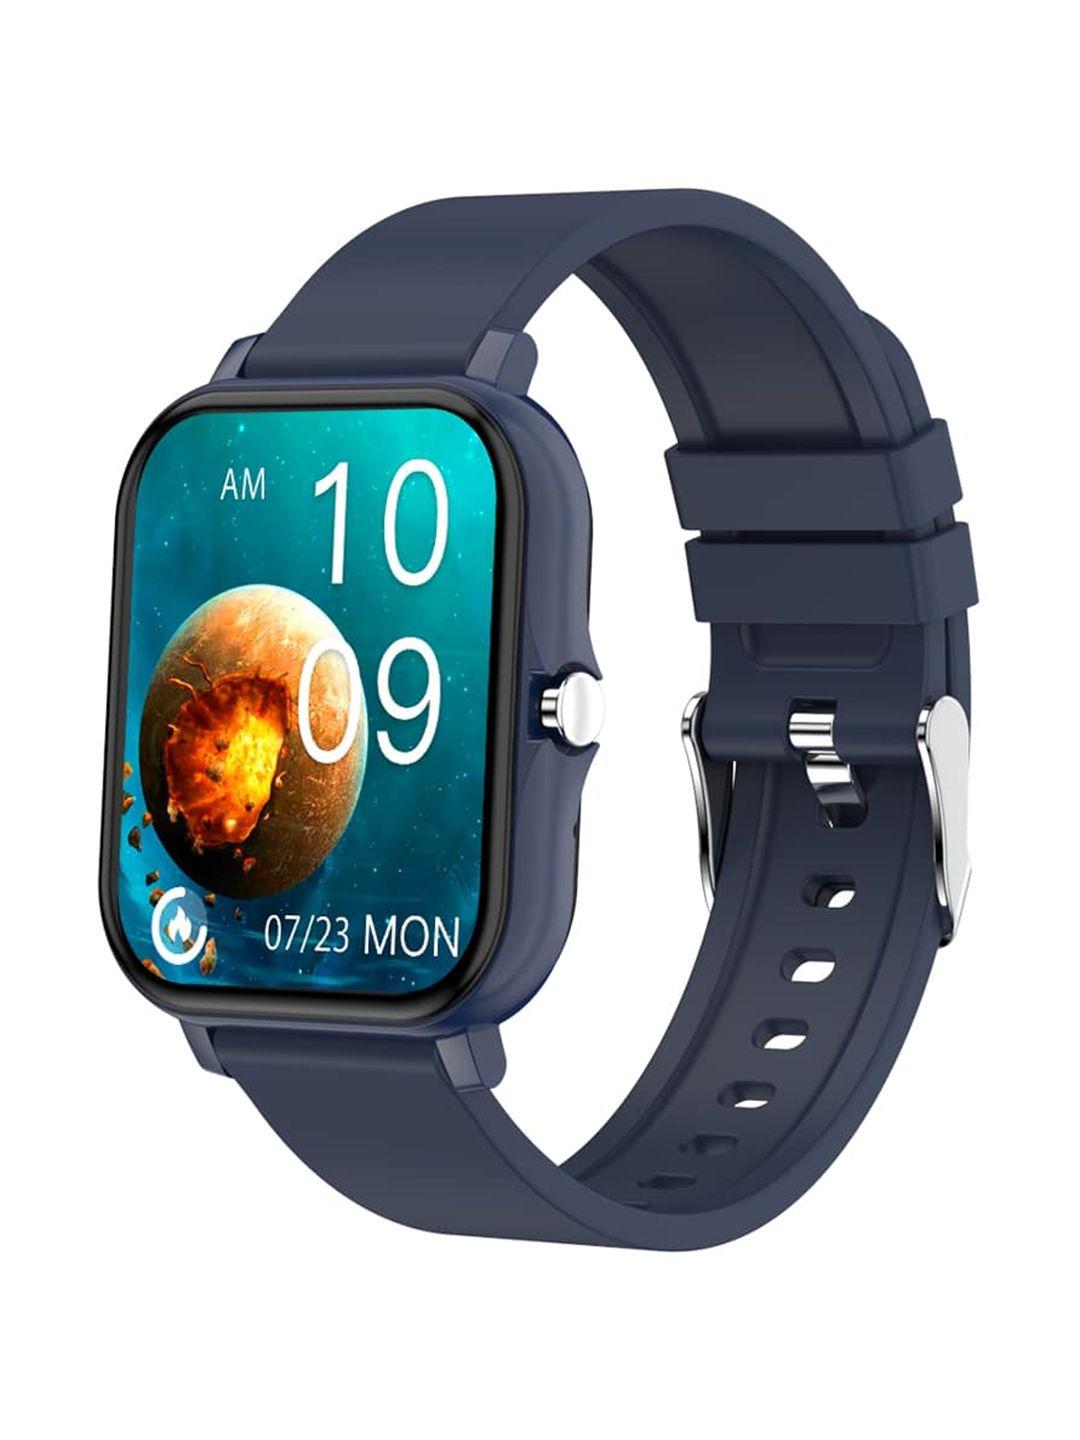 french connection unisex blue screen smartwatch with hrm & smart phone fcuk007b